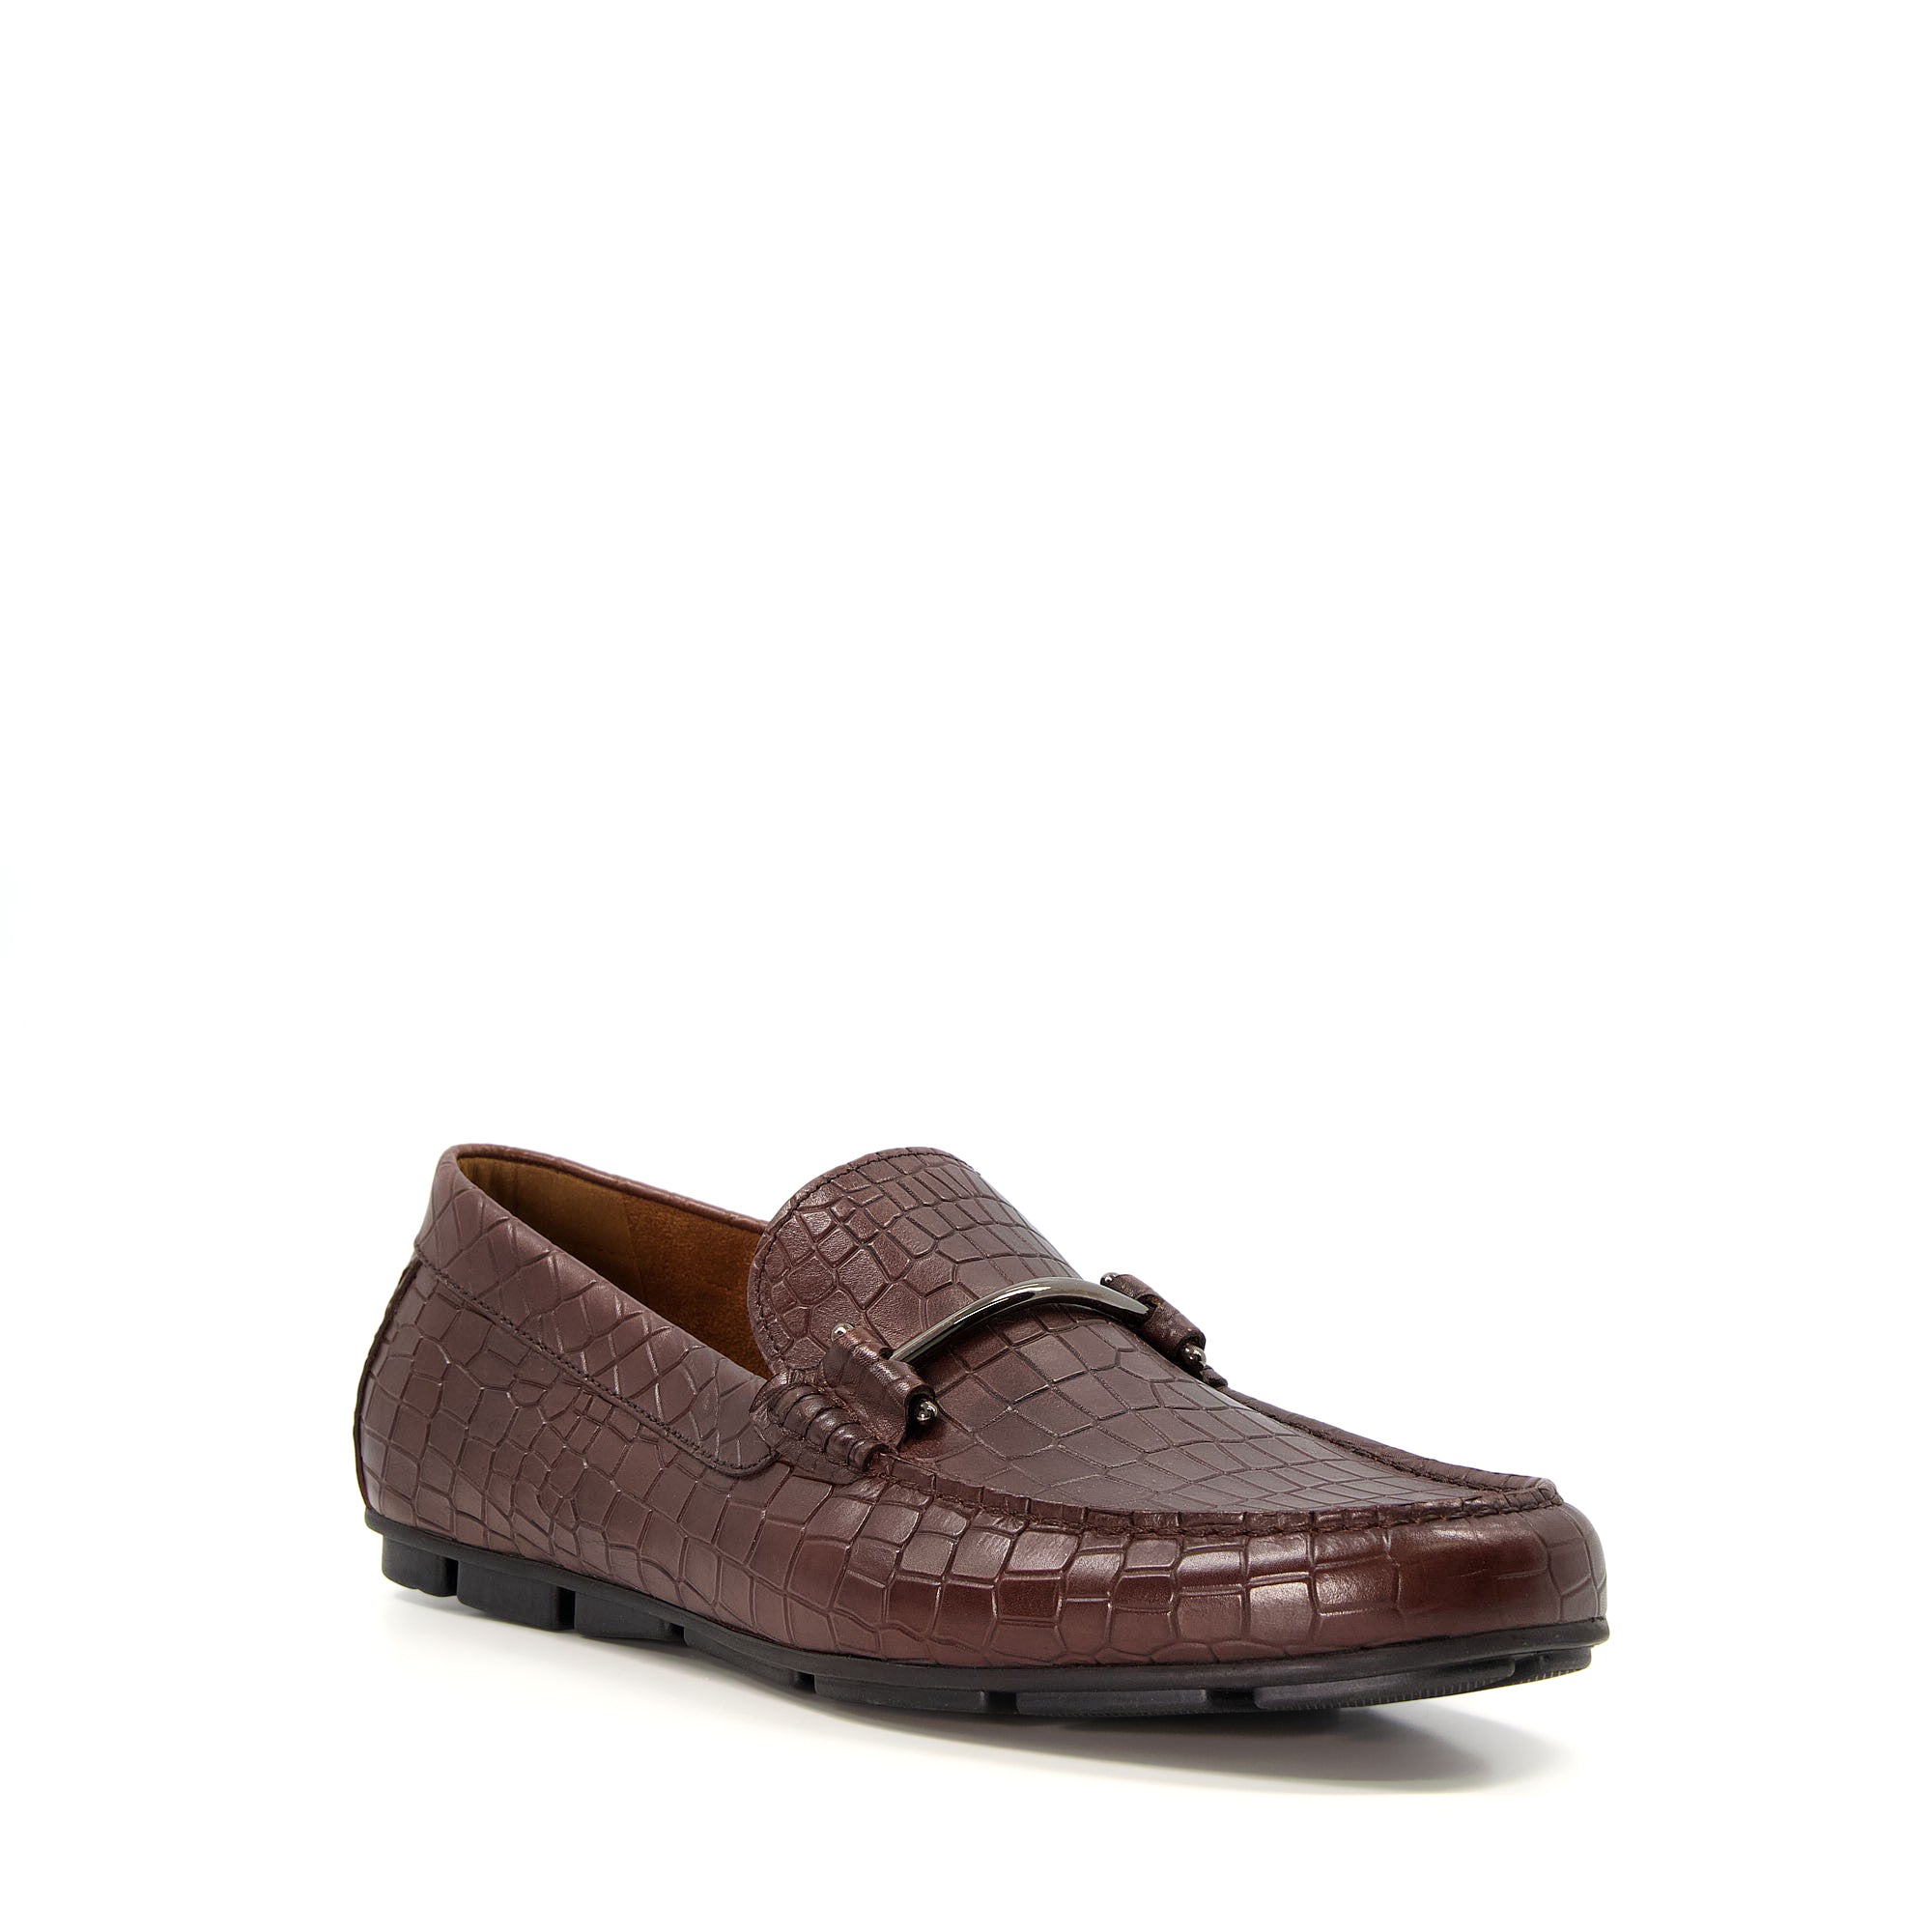 BEYOND DI - Croc Embossed Loafer Shoes